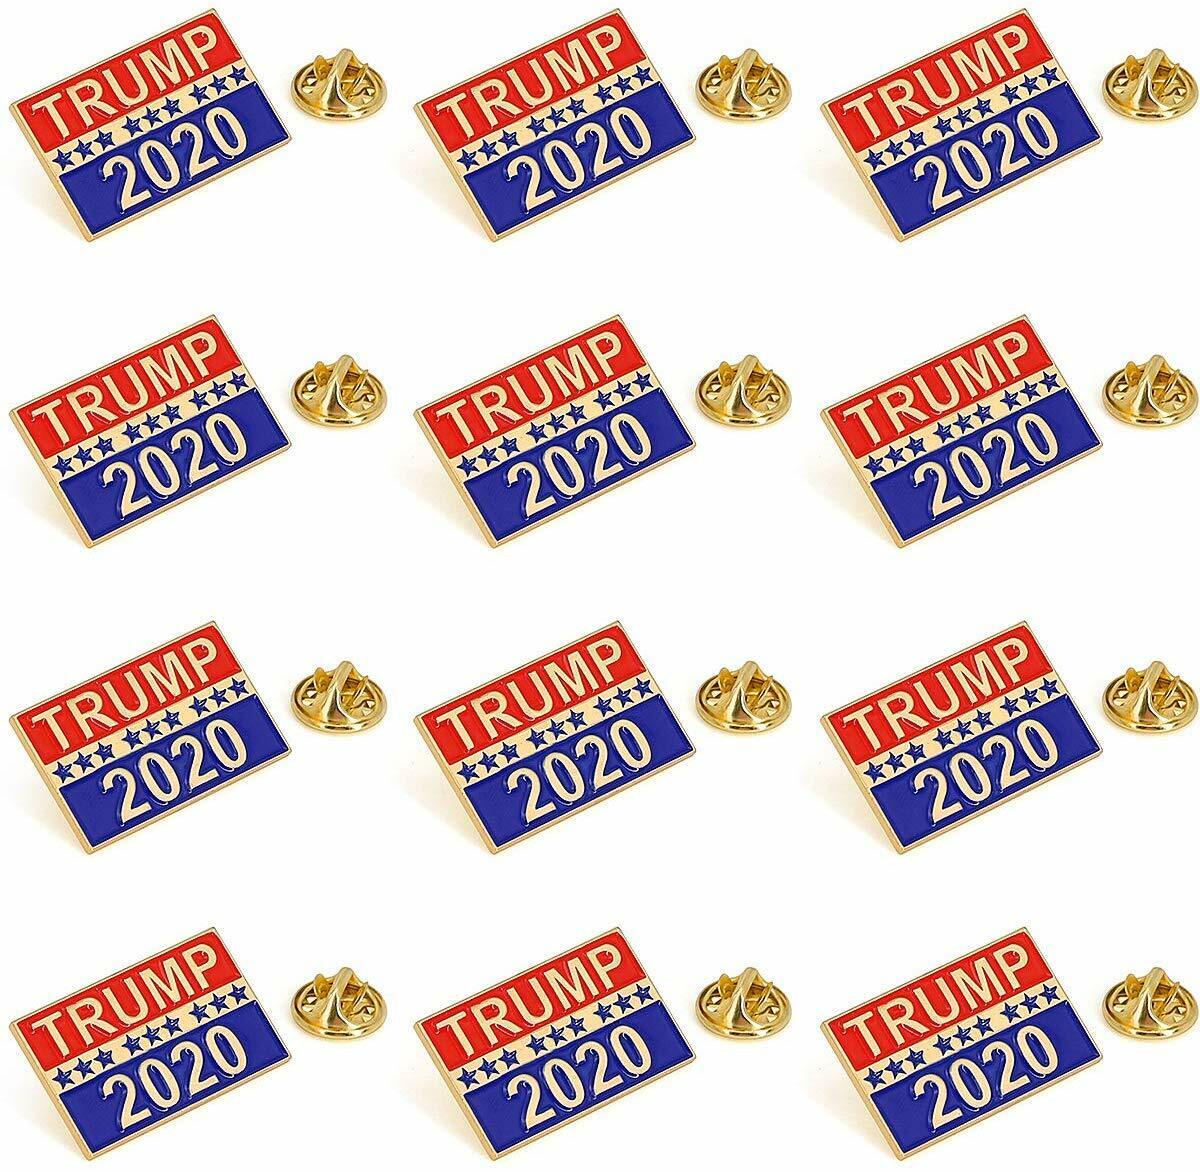 12 Pack Donald Trump for 2020 Re-Elect President Election Pin Brooch 4 Trump